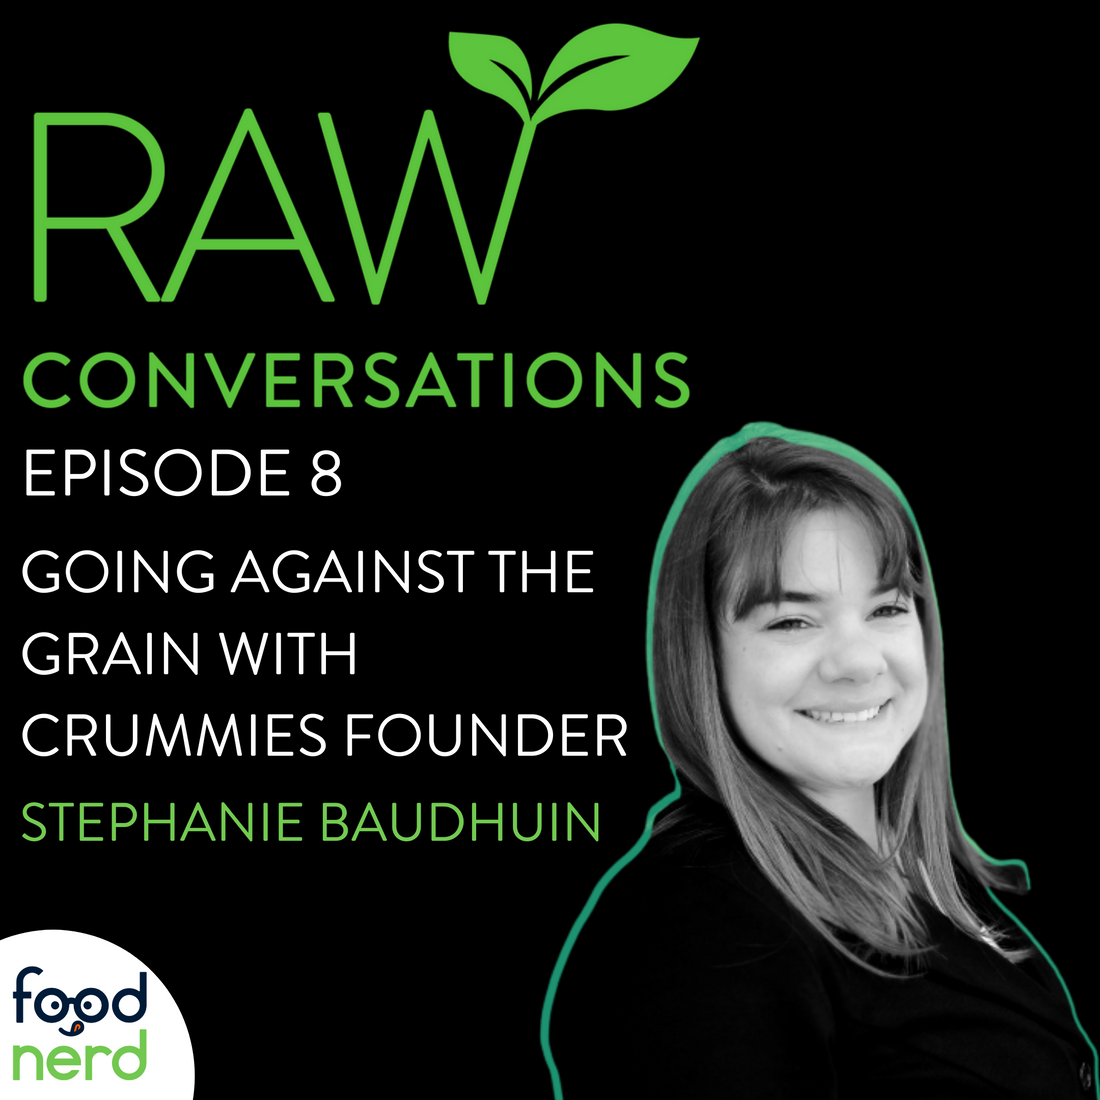 Raw Conversations: Episode 8 Going Against the Grain with Stephanie Boudhein from Crummies Co